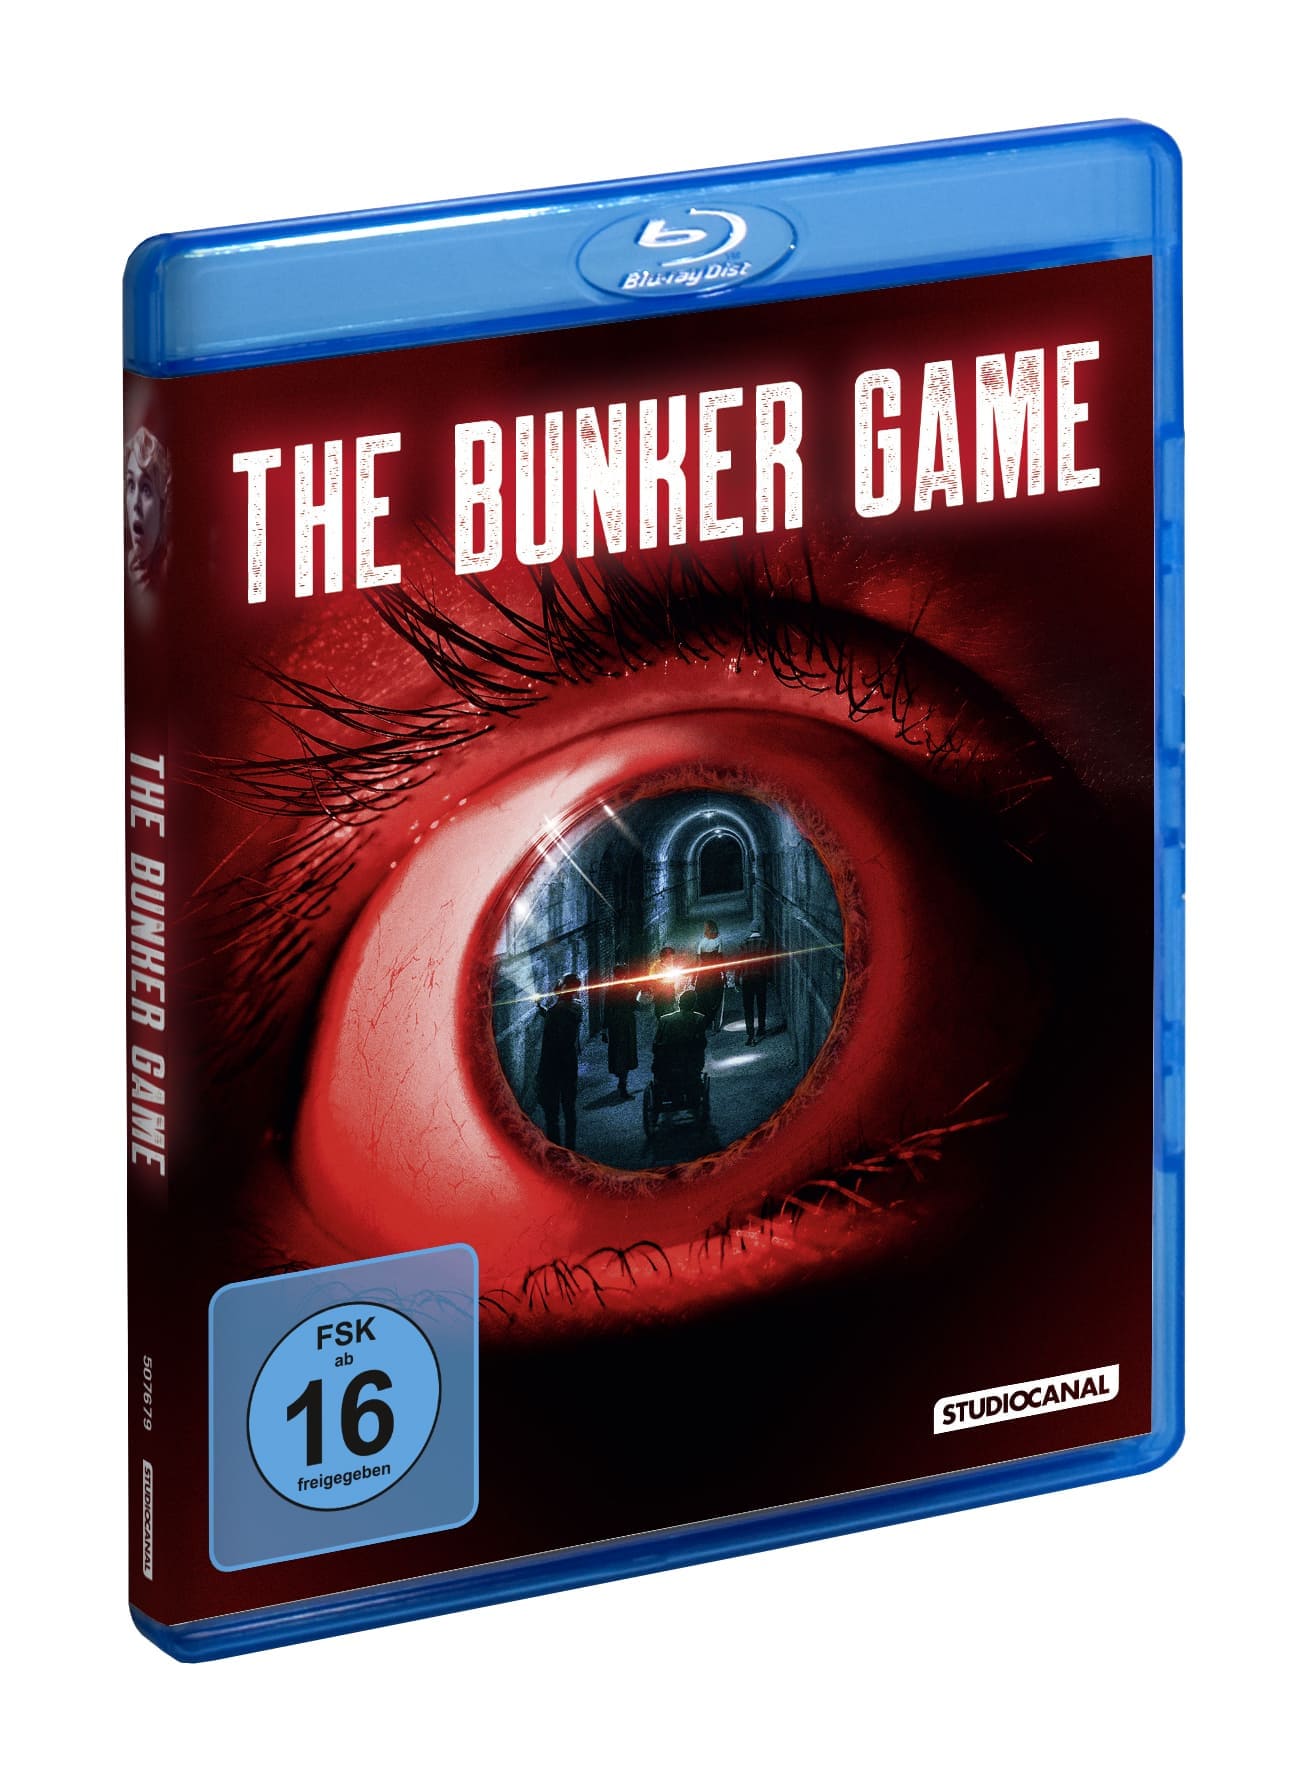 The Bunker Game (Blu-ray) Image 2